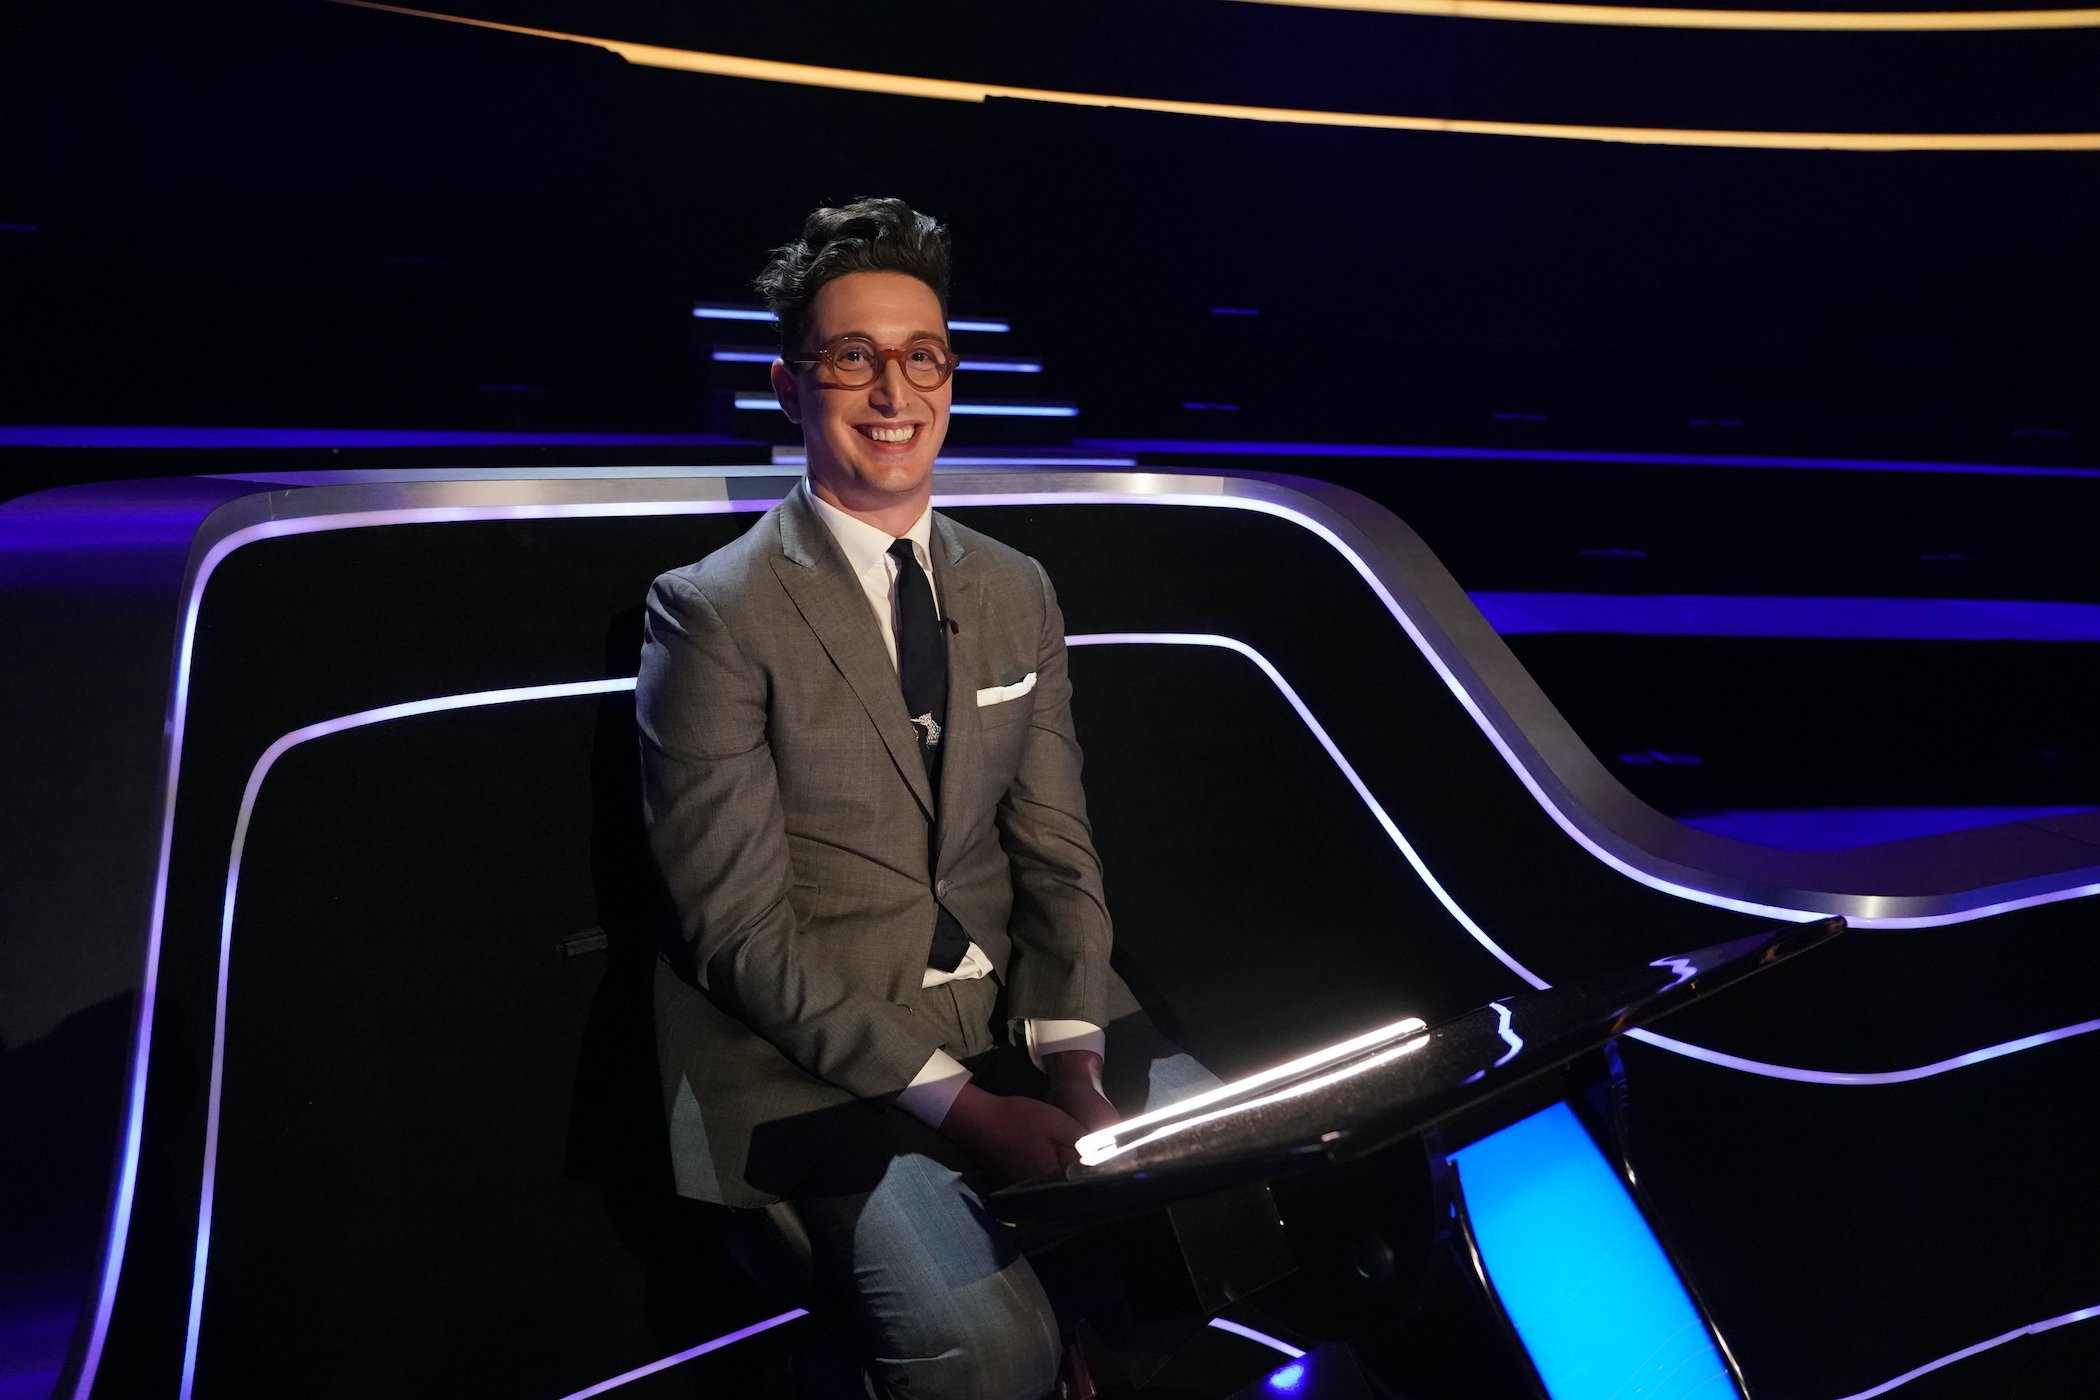 Buzzy Cohen on 'Who Wants To Be A Millionaire?'